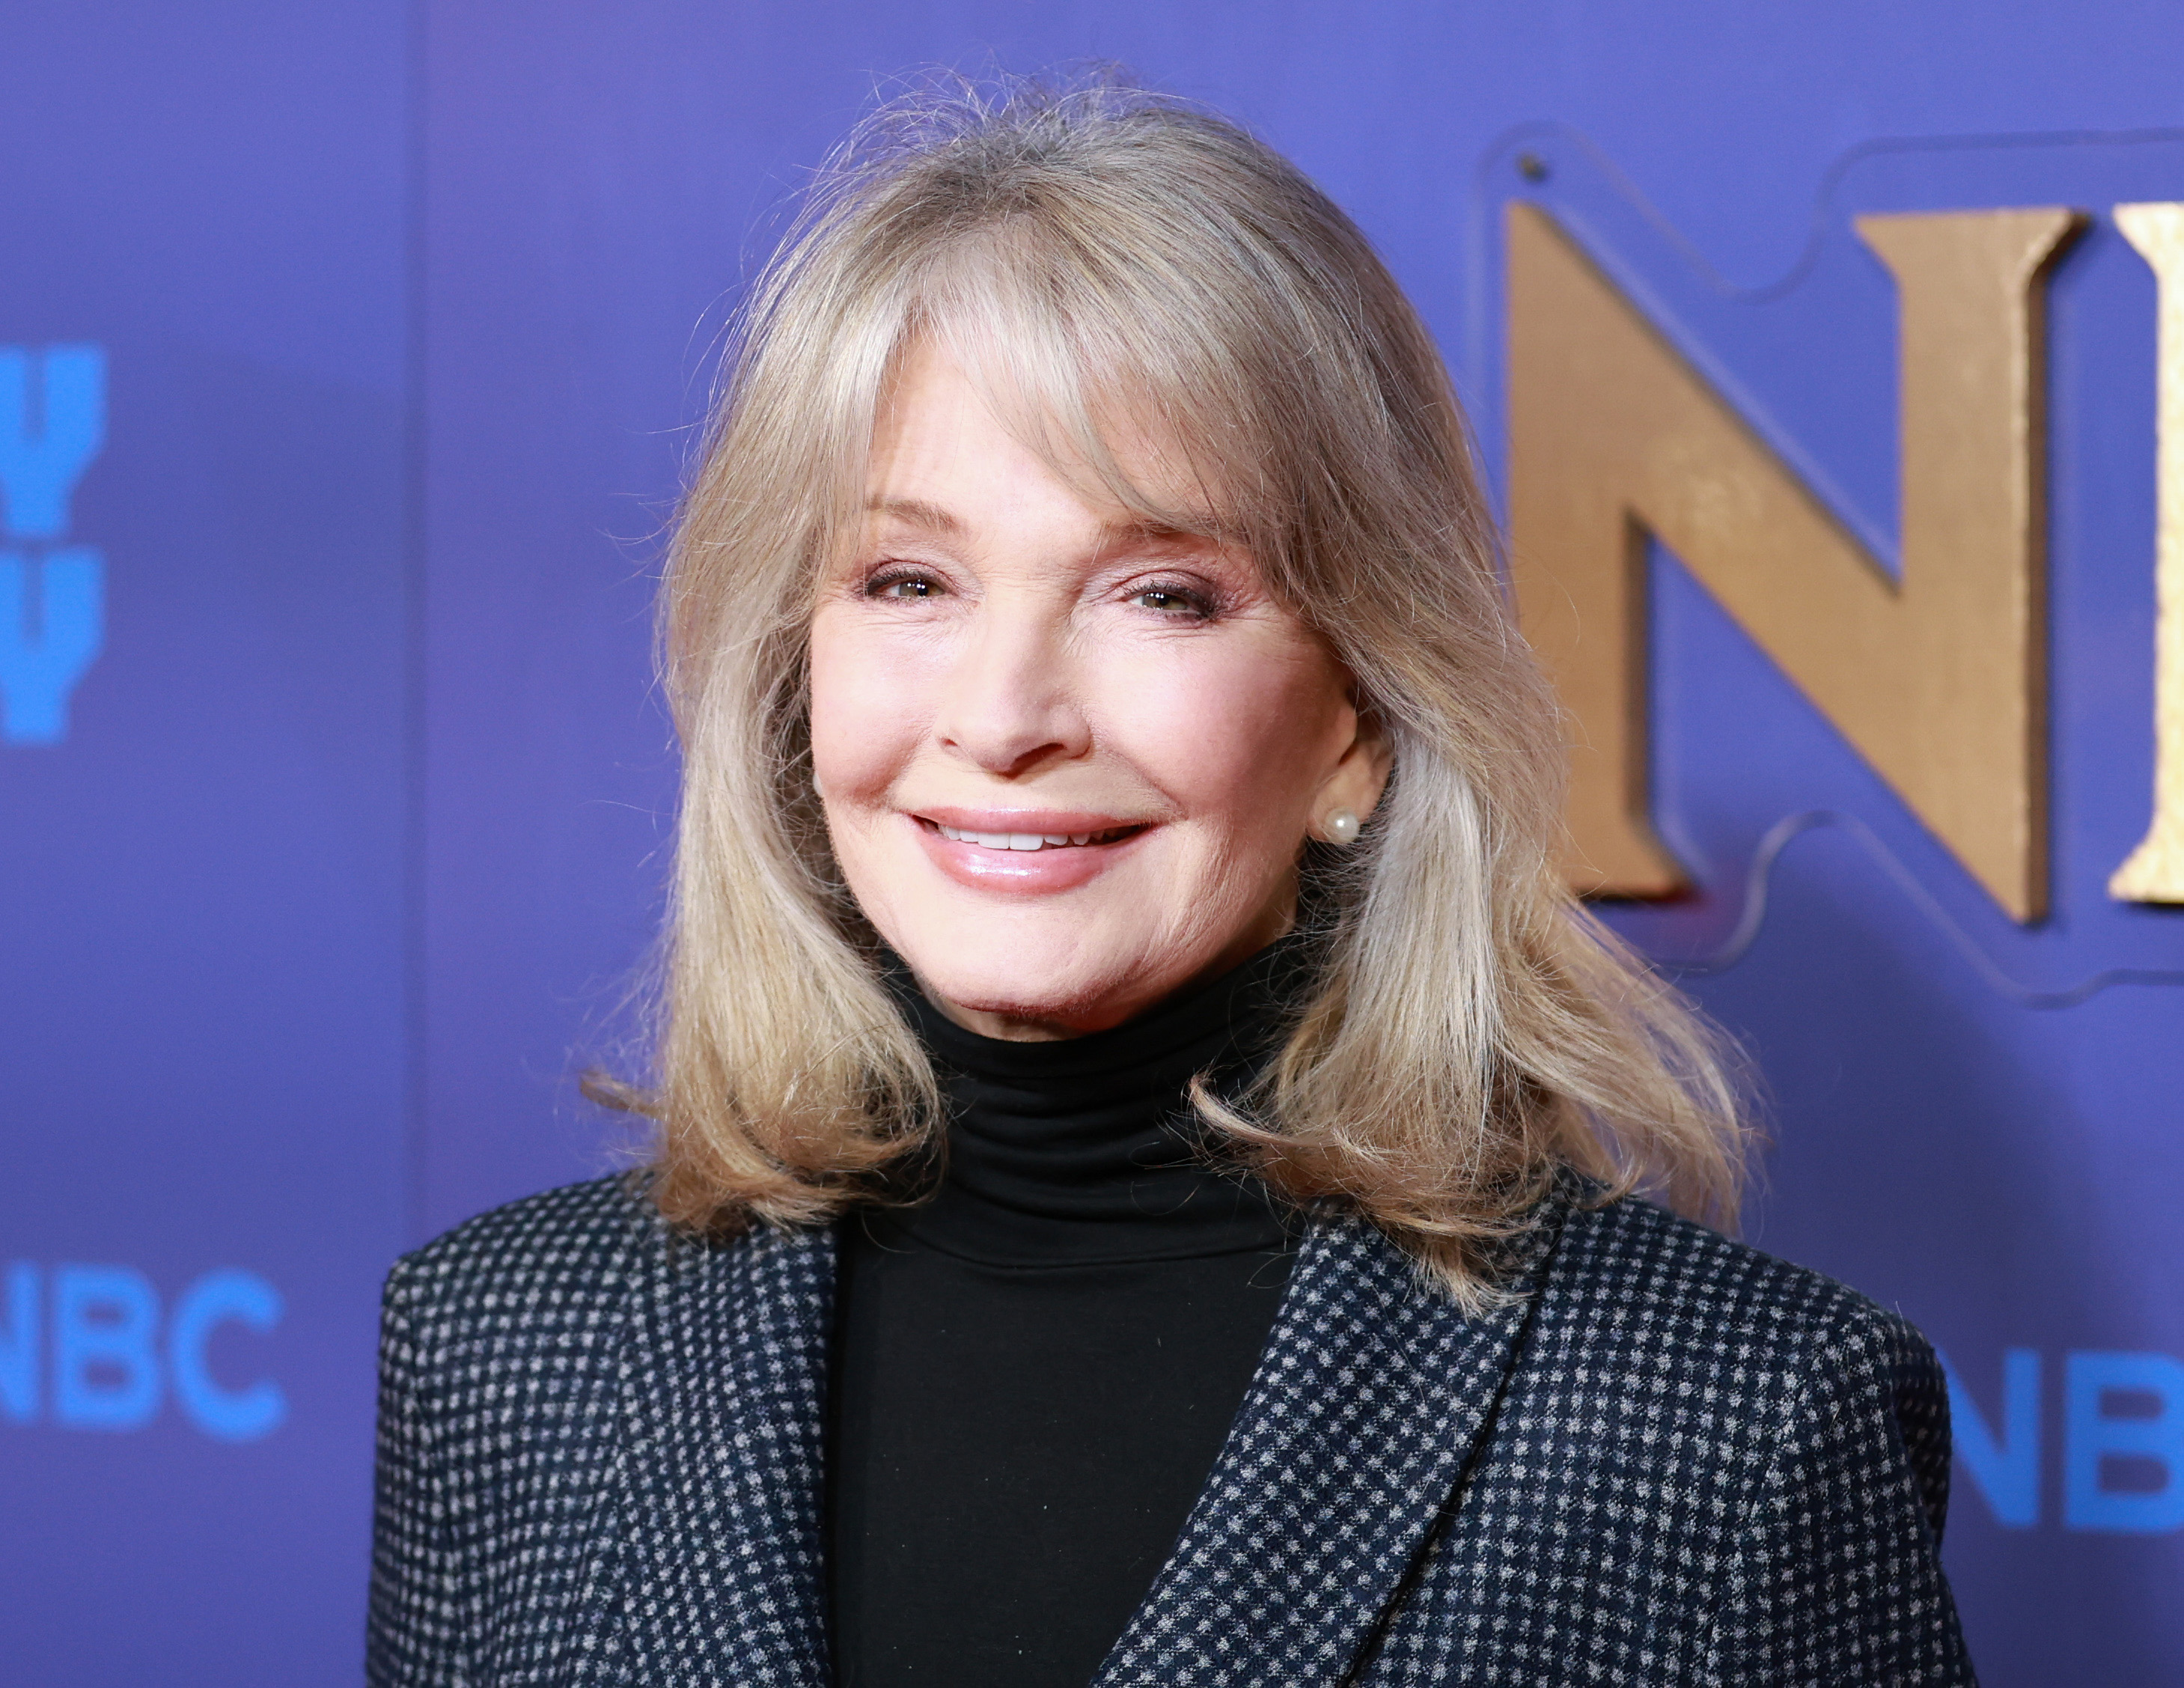 Deidre Hall at the NBC Universal TCA Winter Press Tour on January 15, 2023, in Pasadena, California | Source: Getty Images